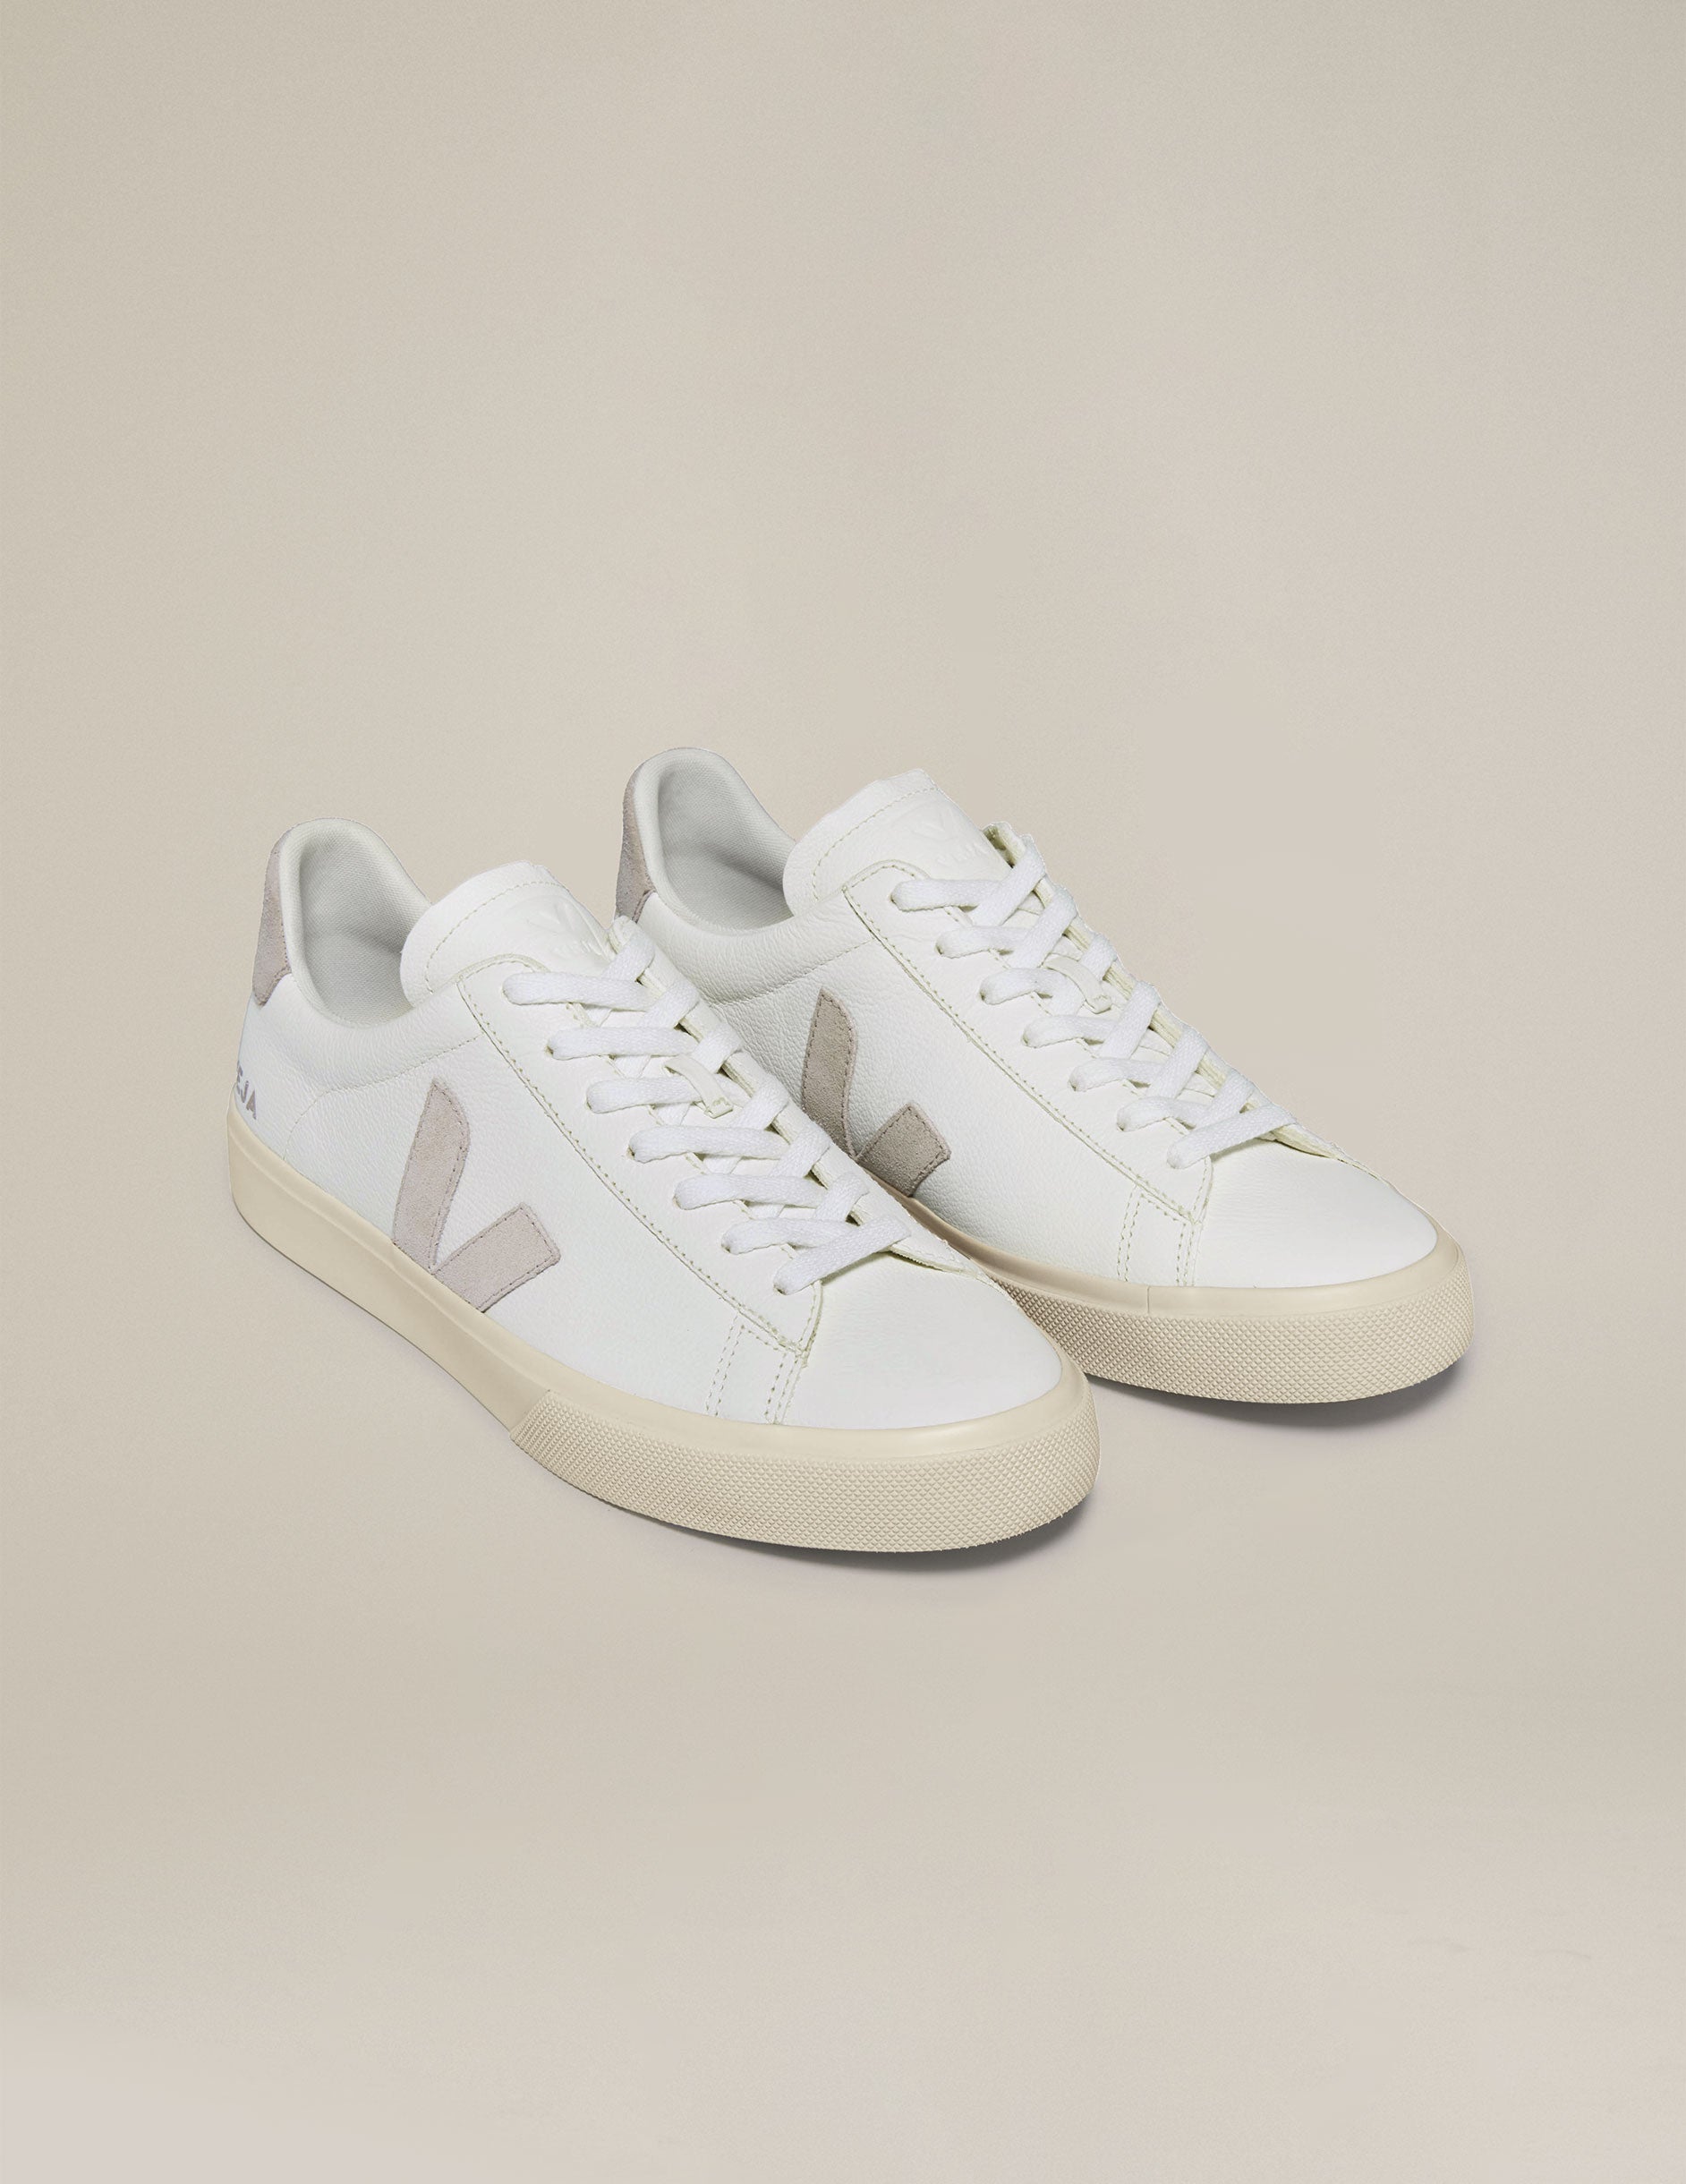 white and tan Veja sneakers.